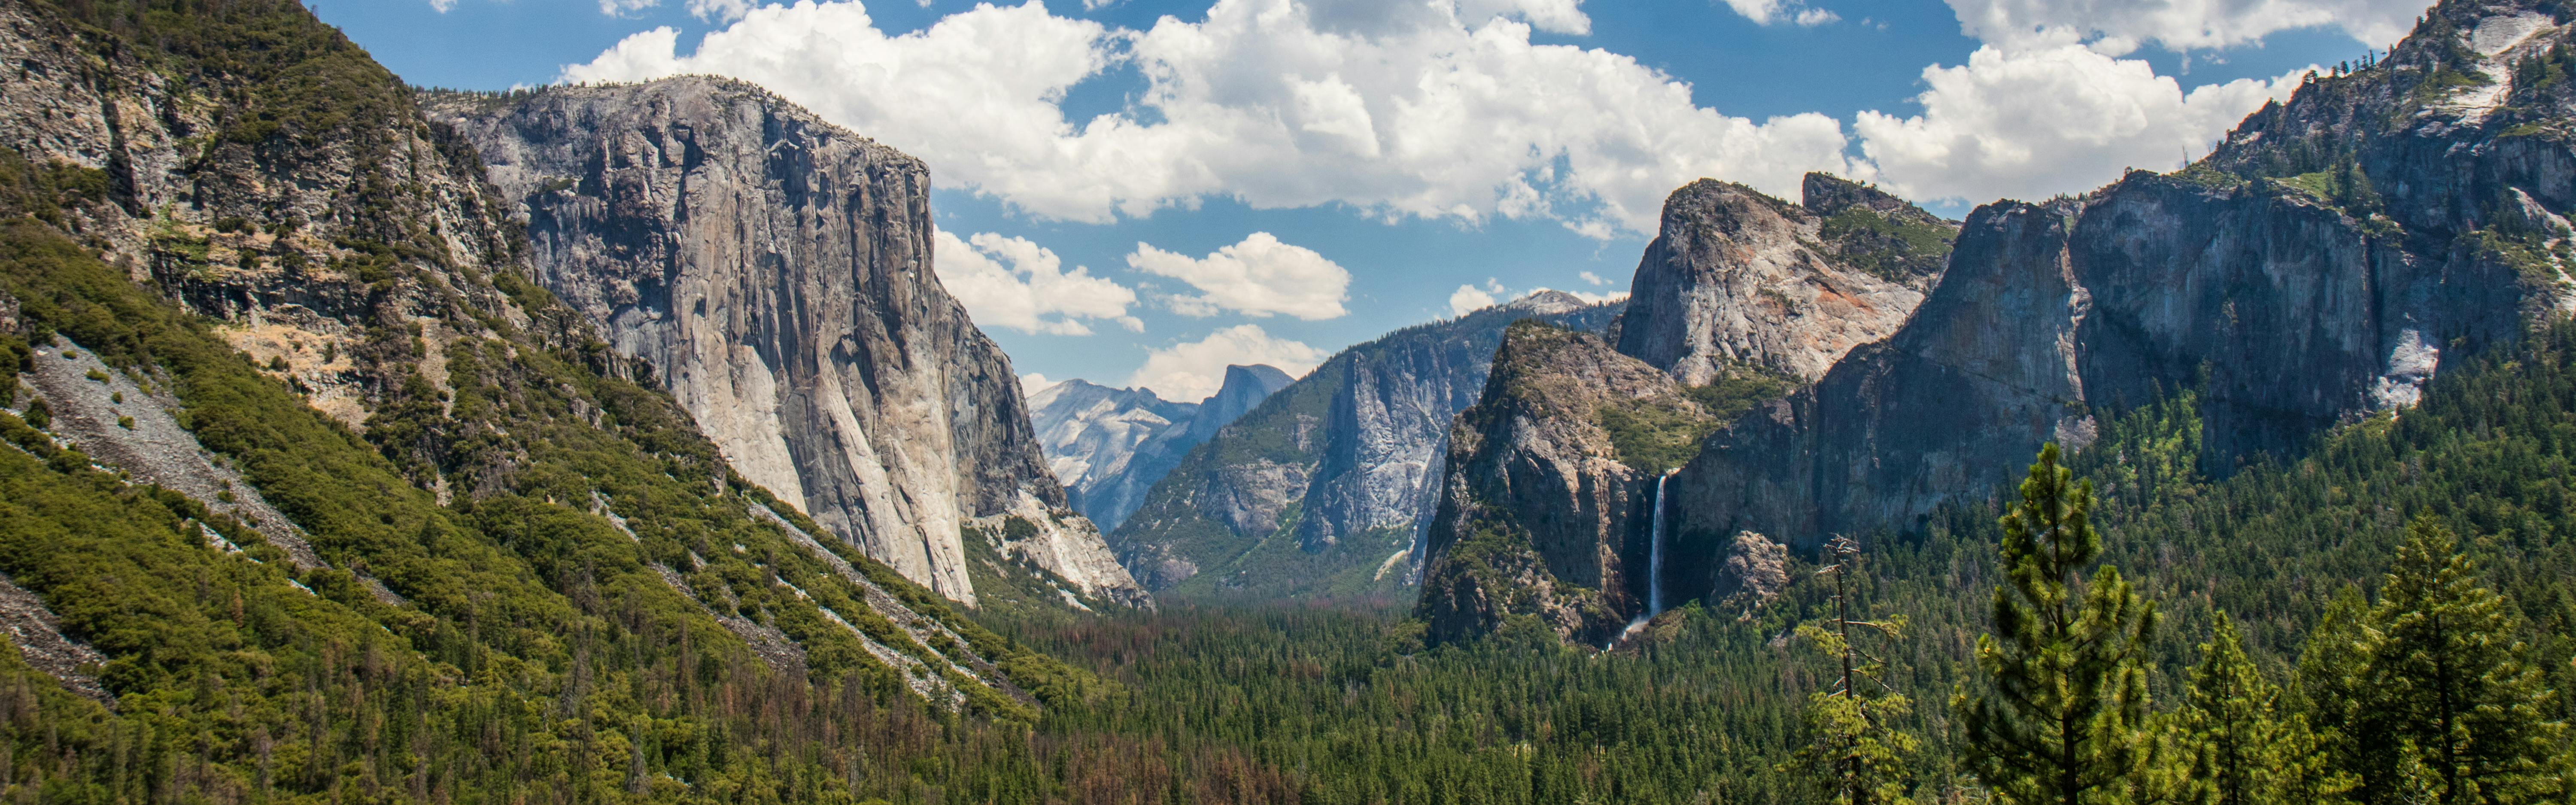 The famous Tunnel View of Yosemite National Park with Half Dome and a waterfall visible on the right side. The landscape is green and lush and the sky above is pale blue with puffy white clouds.